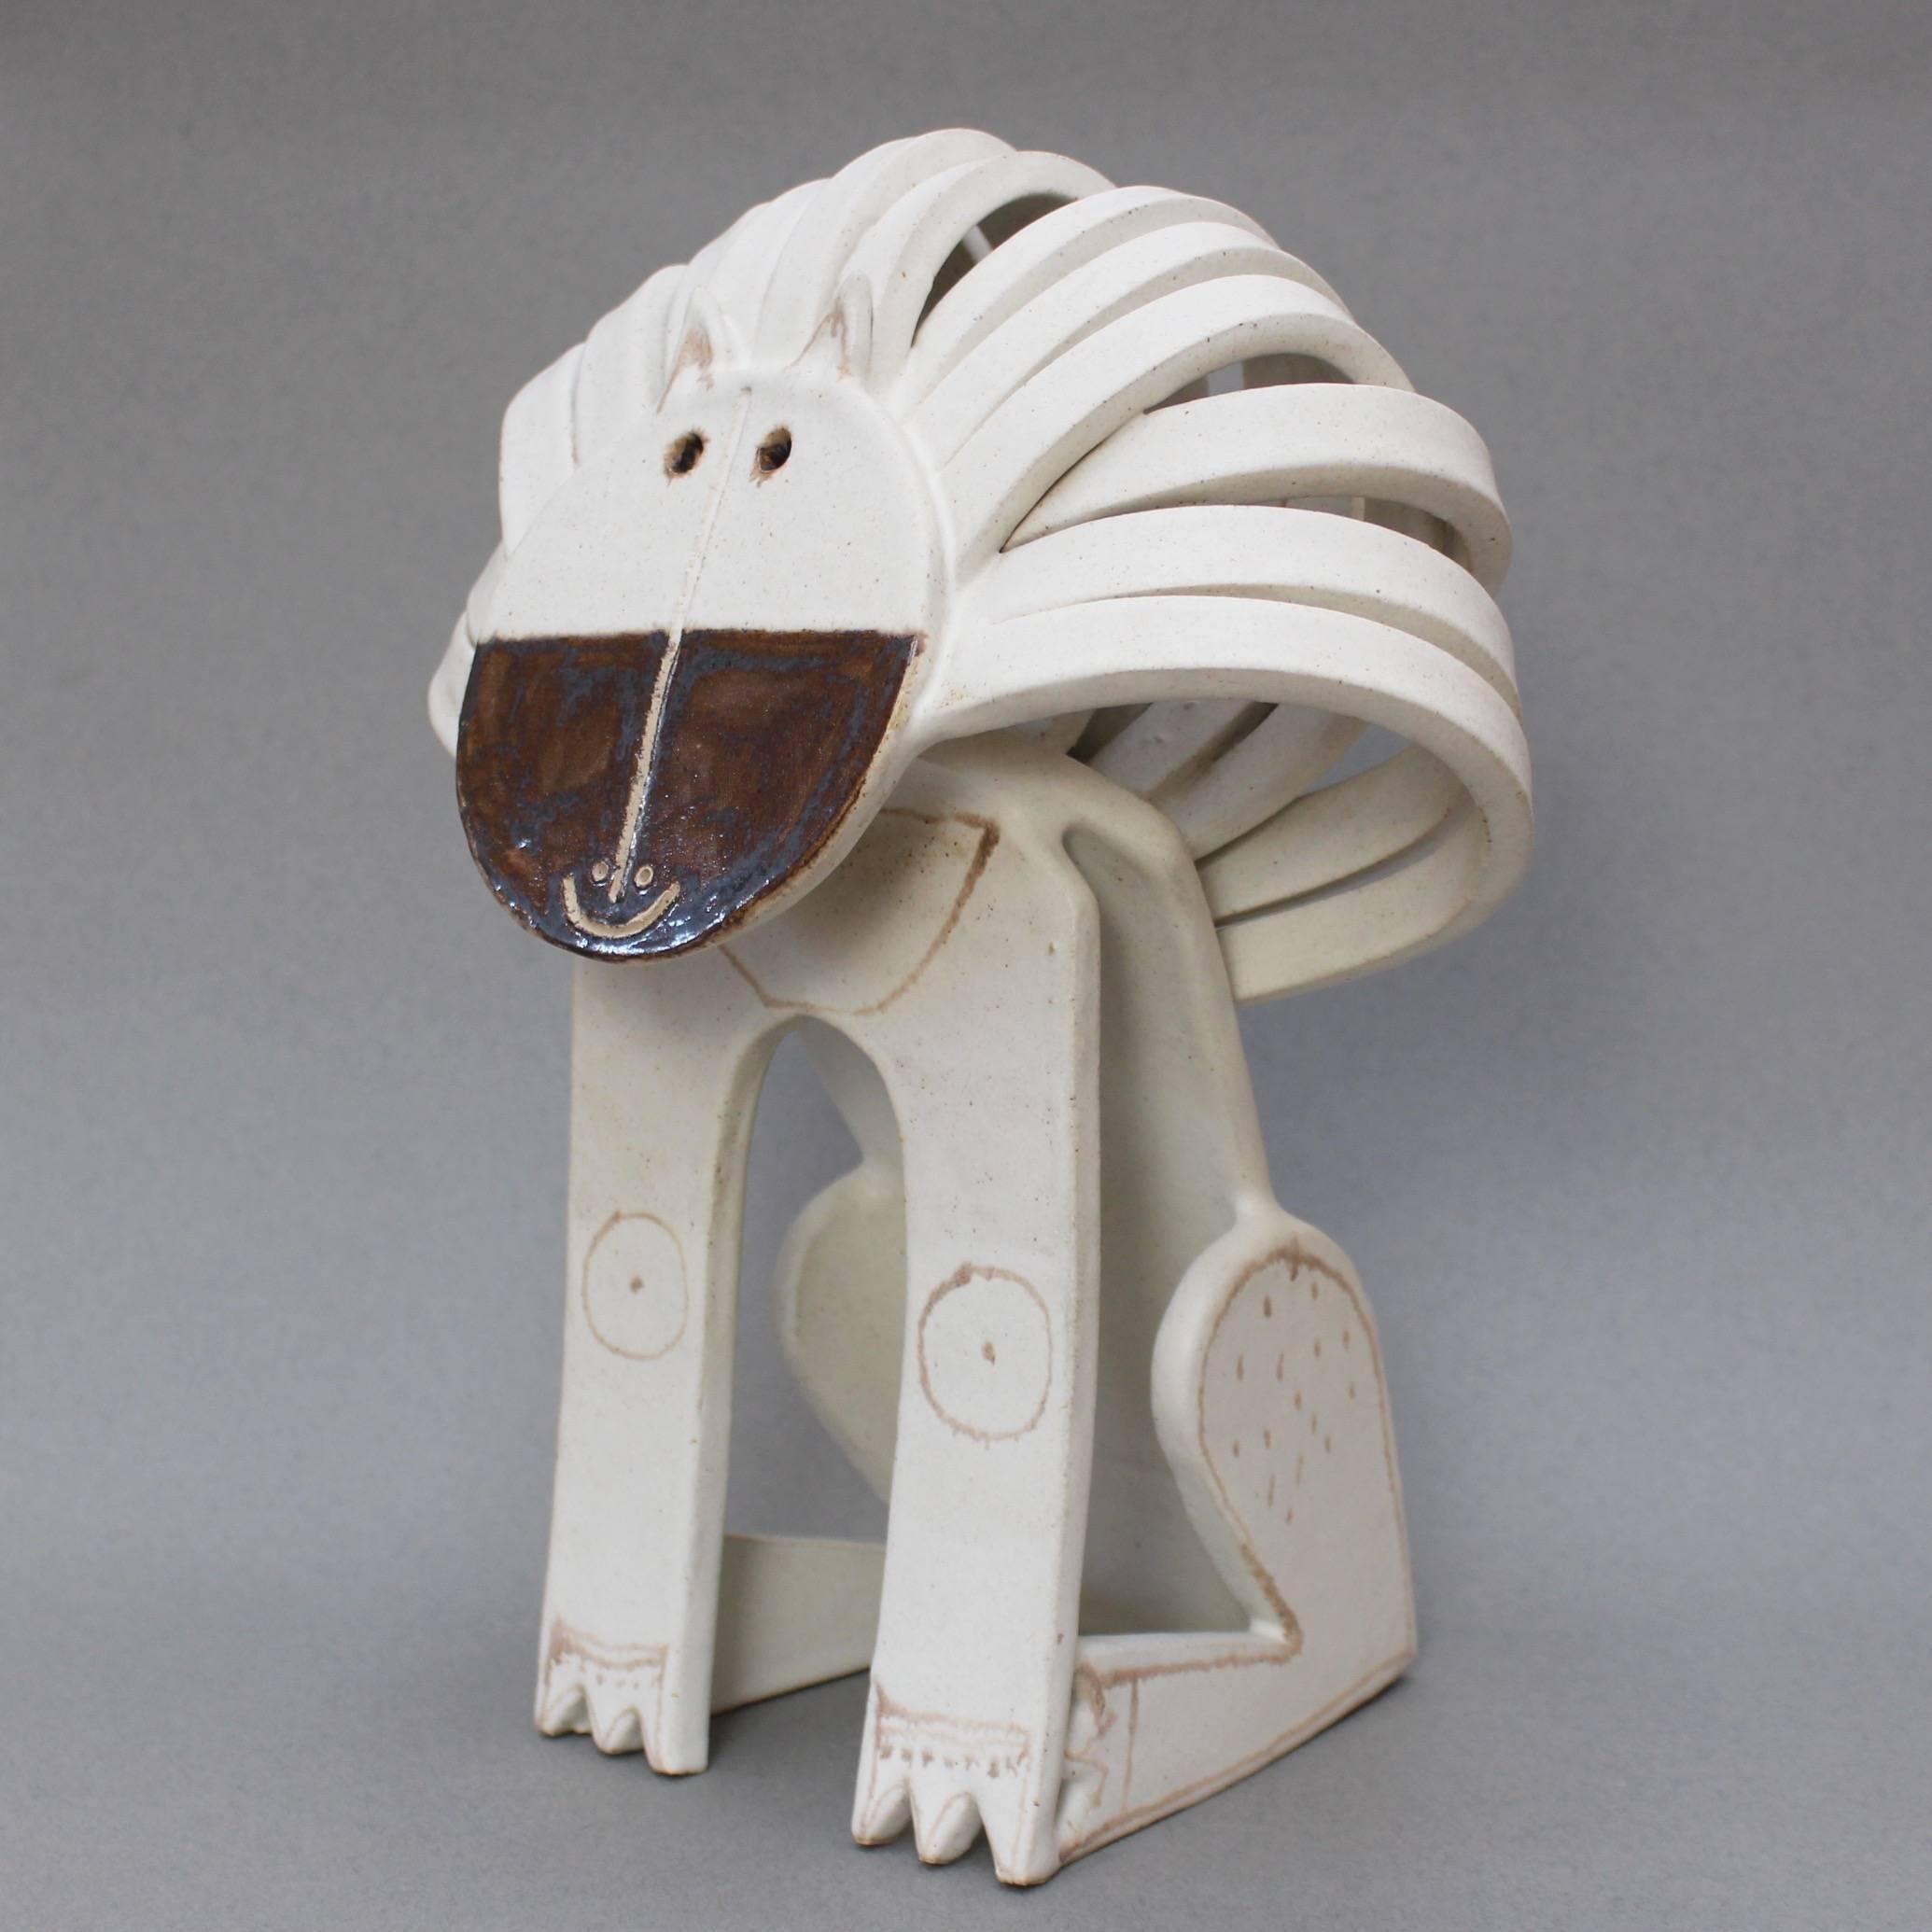 'Ceramic Lion Sculpture', by ceramicist Bruno Gambone, (circa 1970s). This large seated lion sculpture is truly a work of art. It is whimsical, yet beautiful in its use of the pared-down design elements associated with minimalism. Its chalk-white